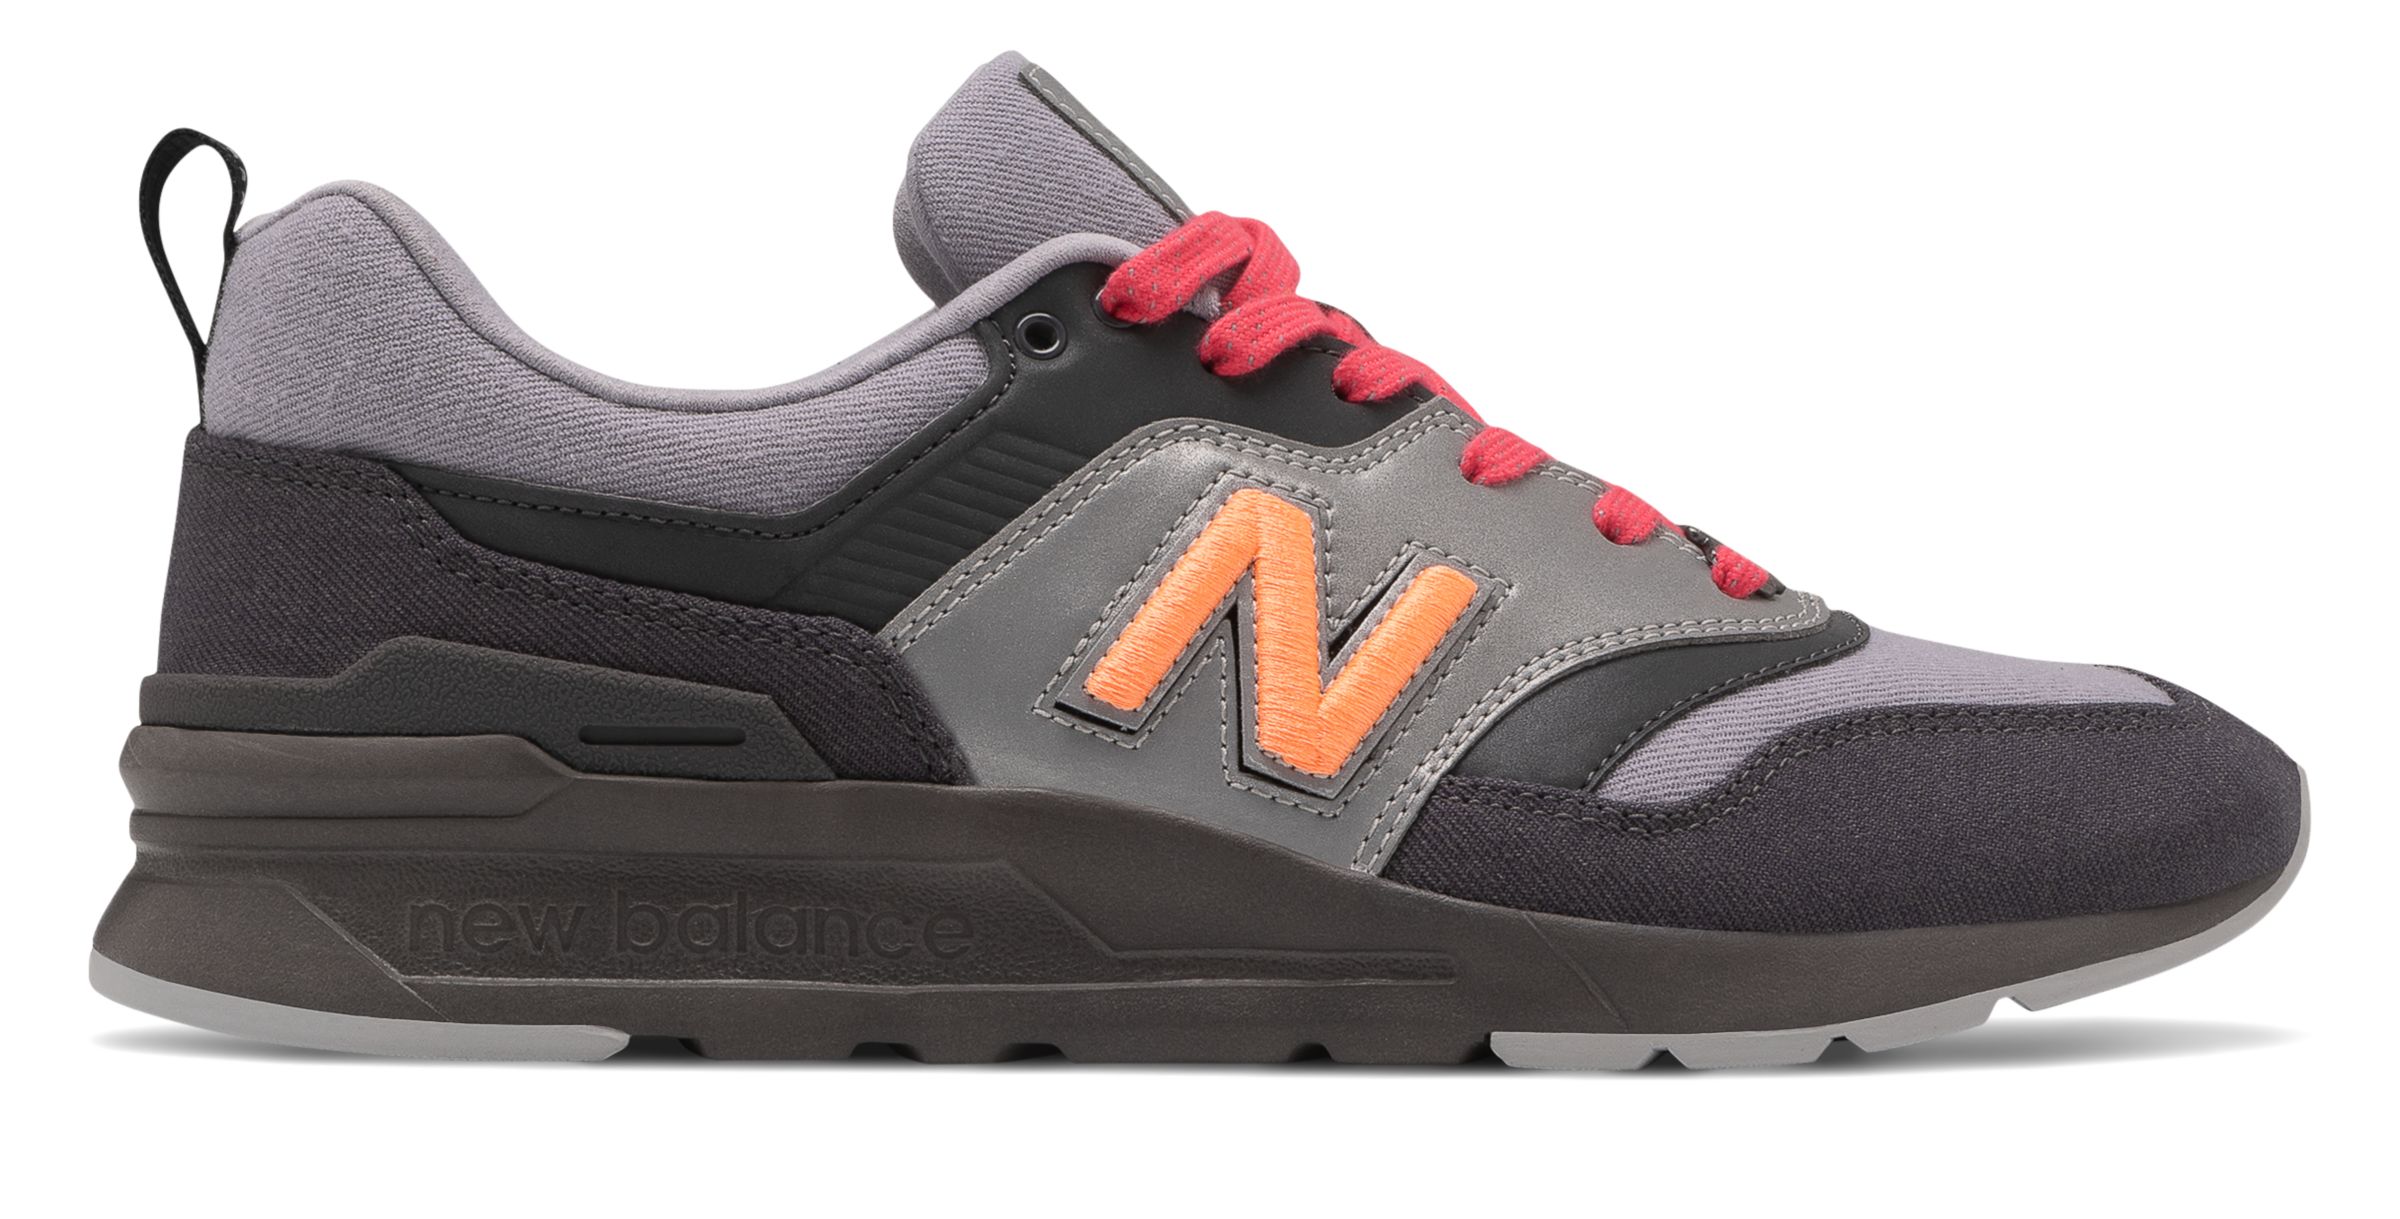 New Balance CM997HV1-32037-M on Sale - Discounts Up to 59% Off on CM997HNE  at Joe's New Balance Outlet